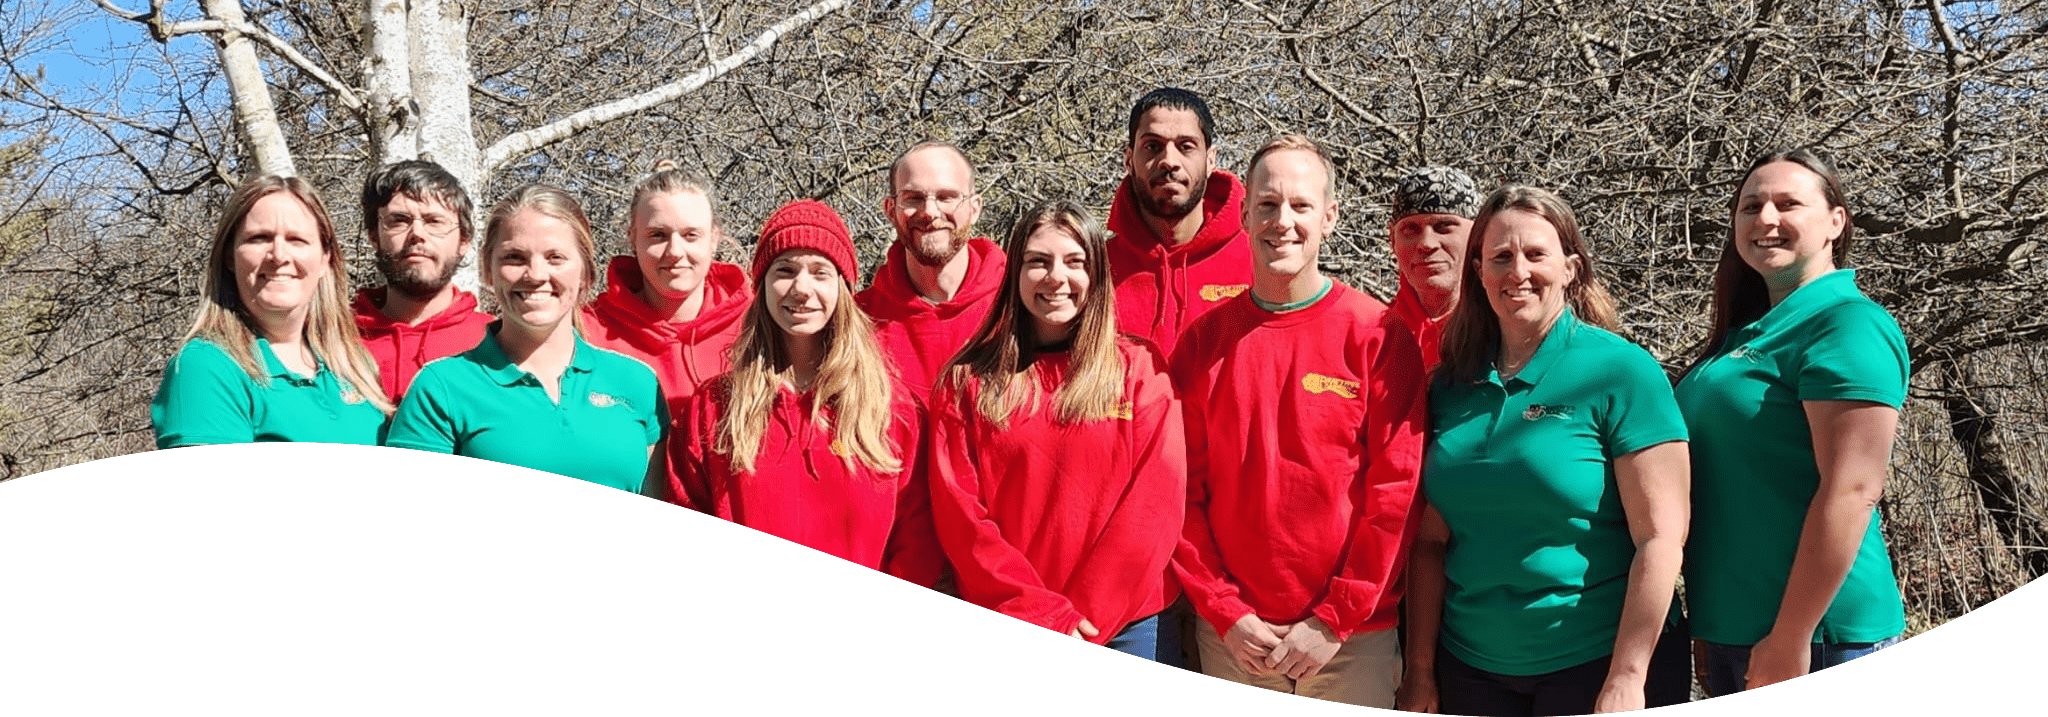 A group of eleven people standing outdoors, wearing green and red uniforms, smiling for a photo with a leafless tree background.